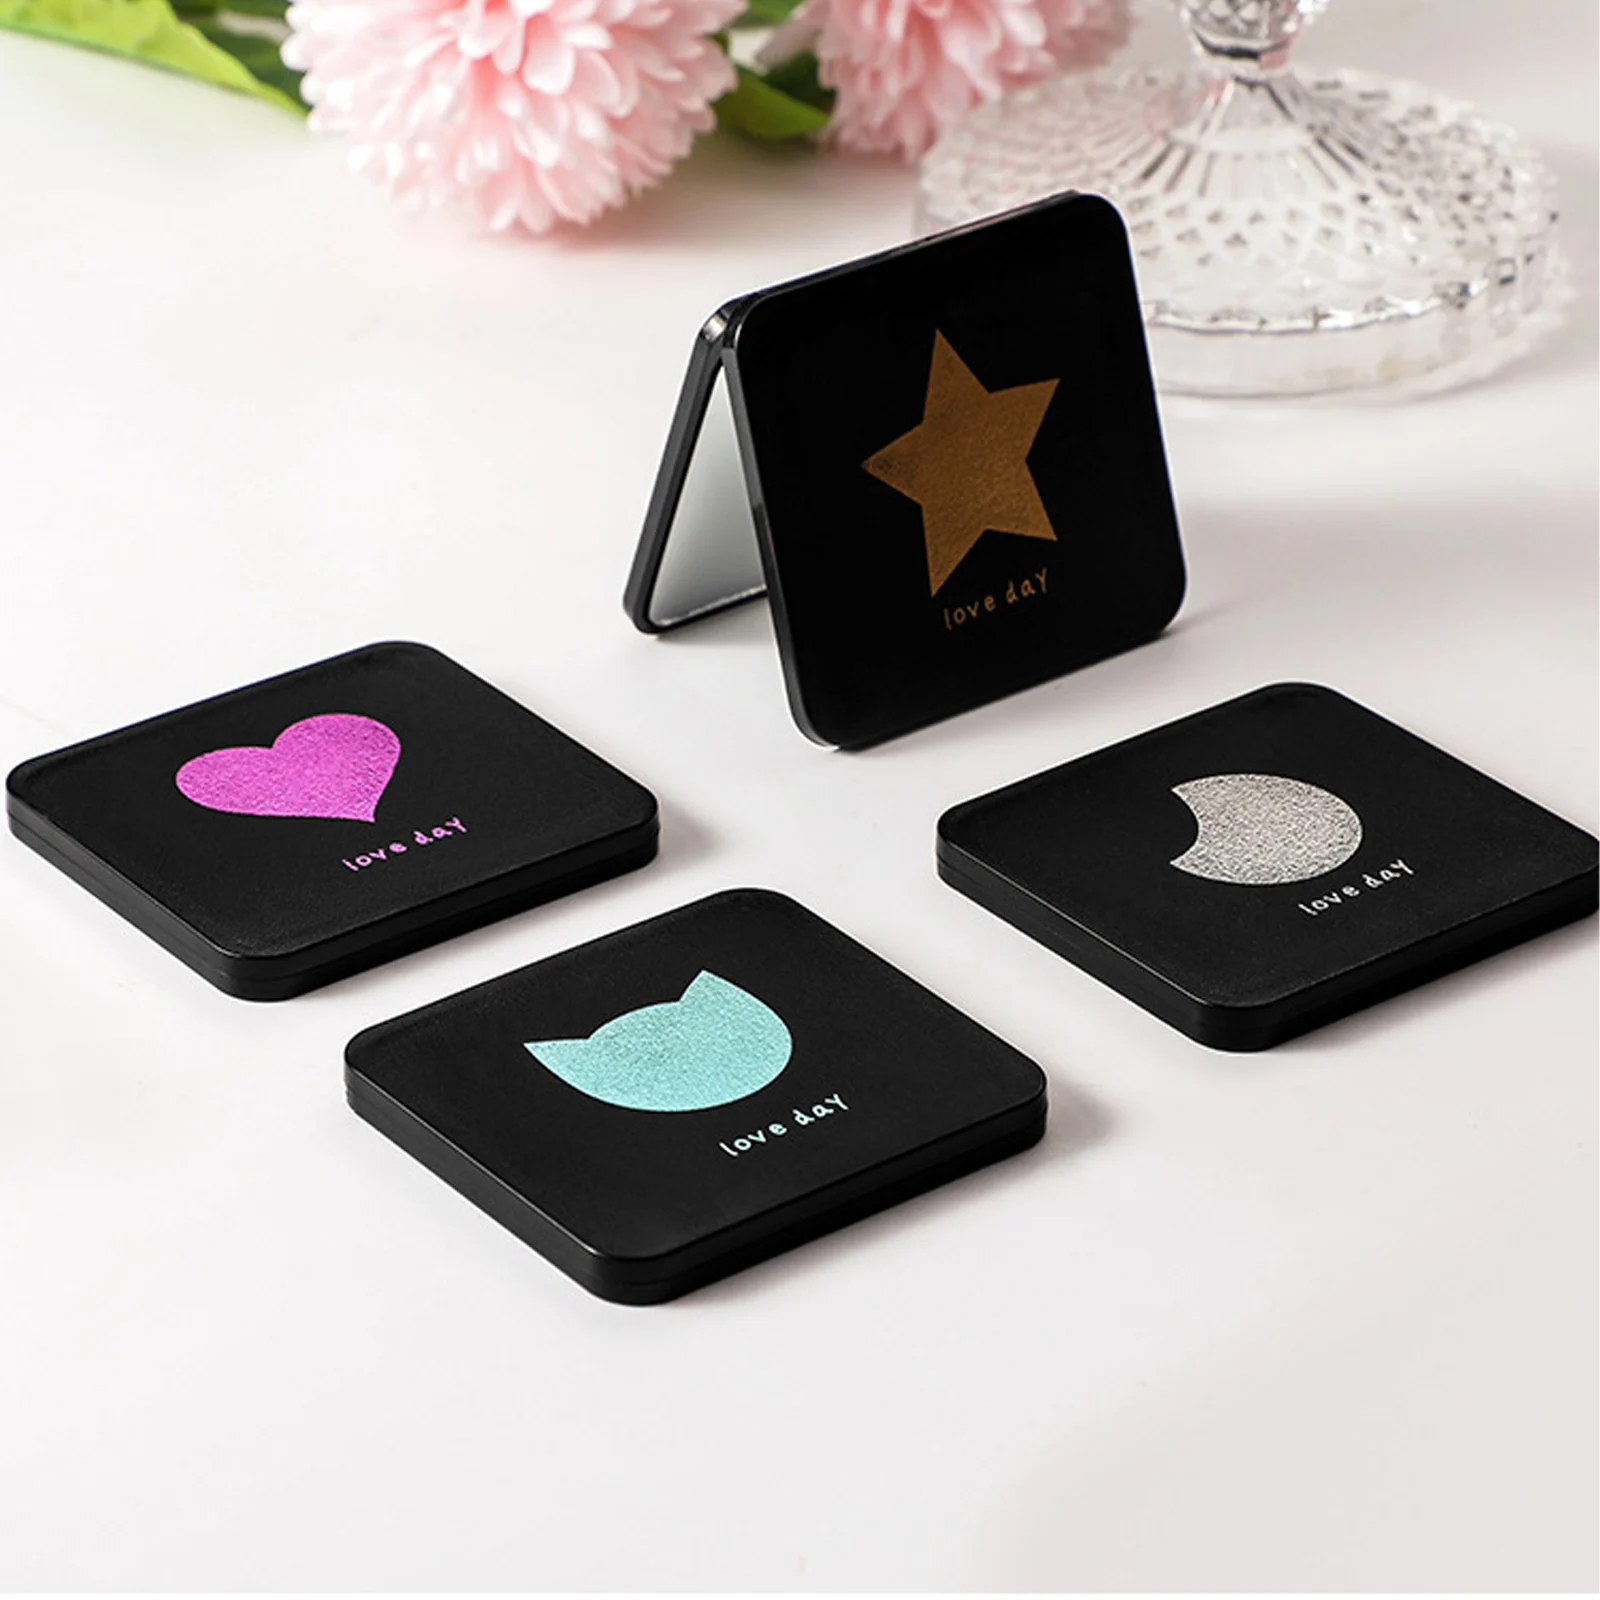 Mini Double Sided Makeup Mirror Folding Compact Mirror Female Portable Travel Square Handheld Pocket Mirror Makeup Accessories